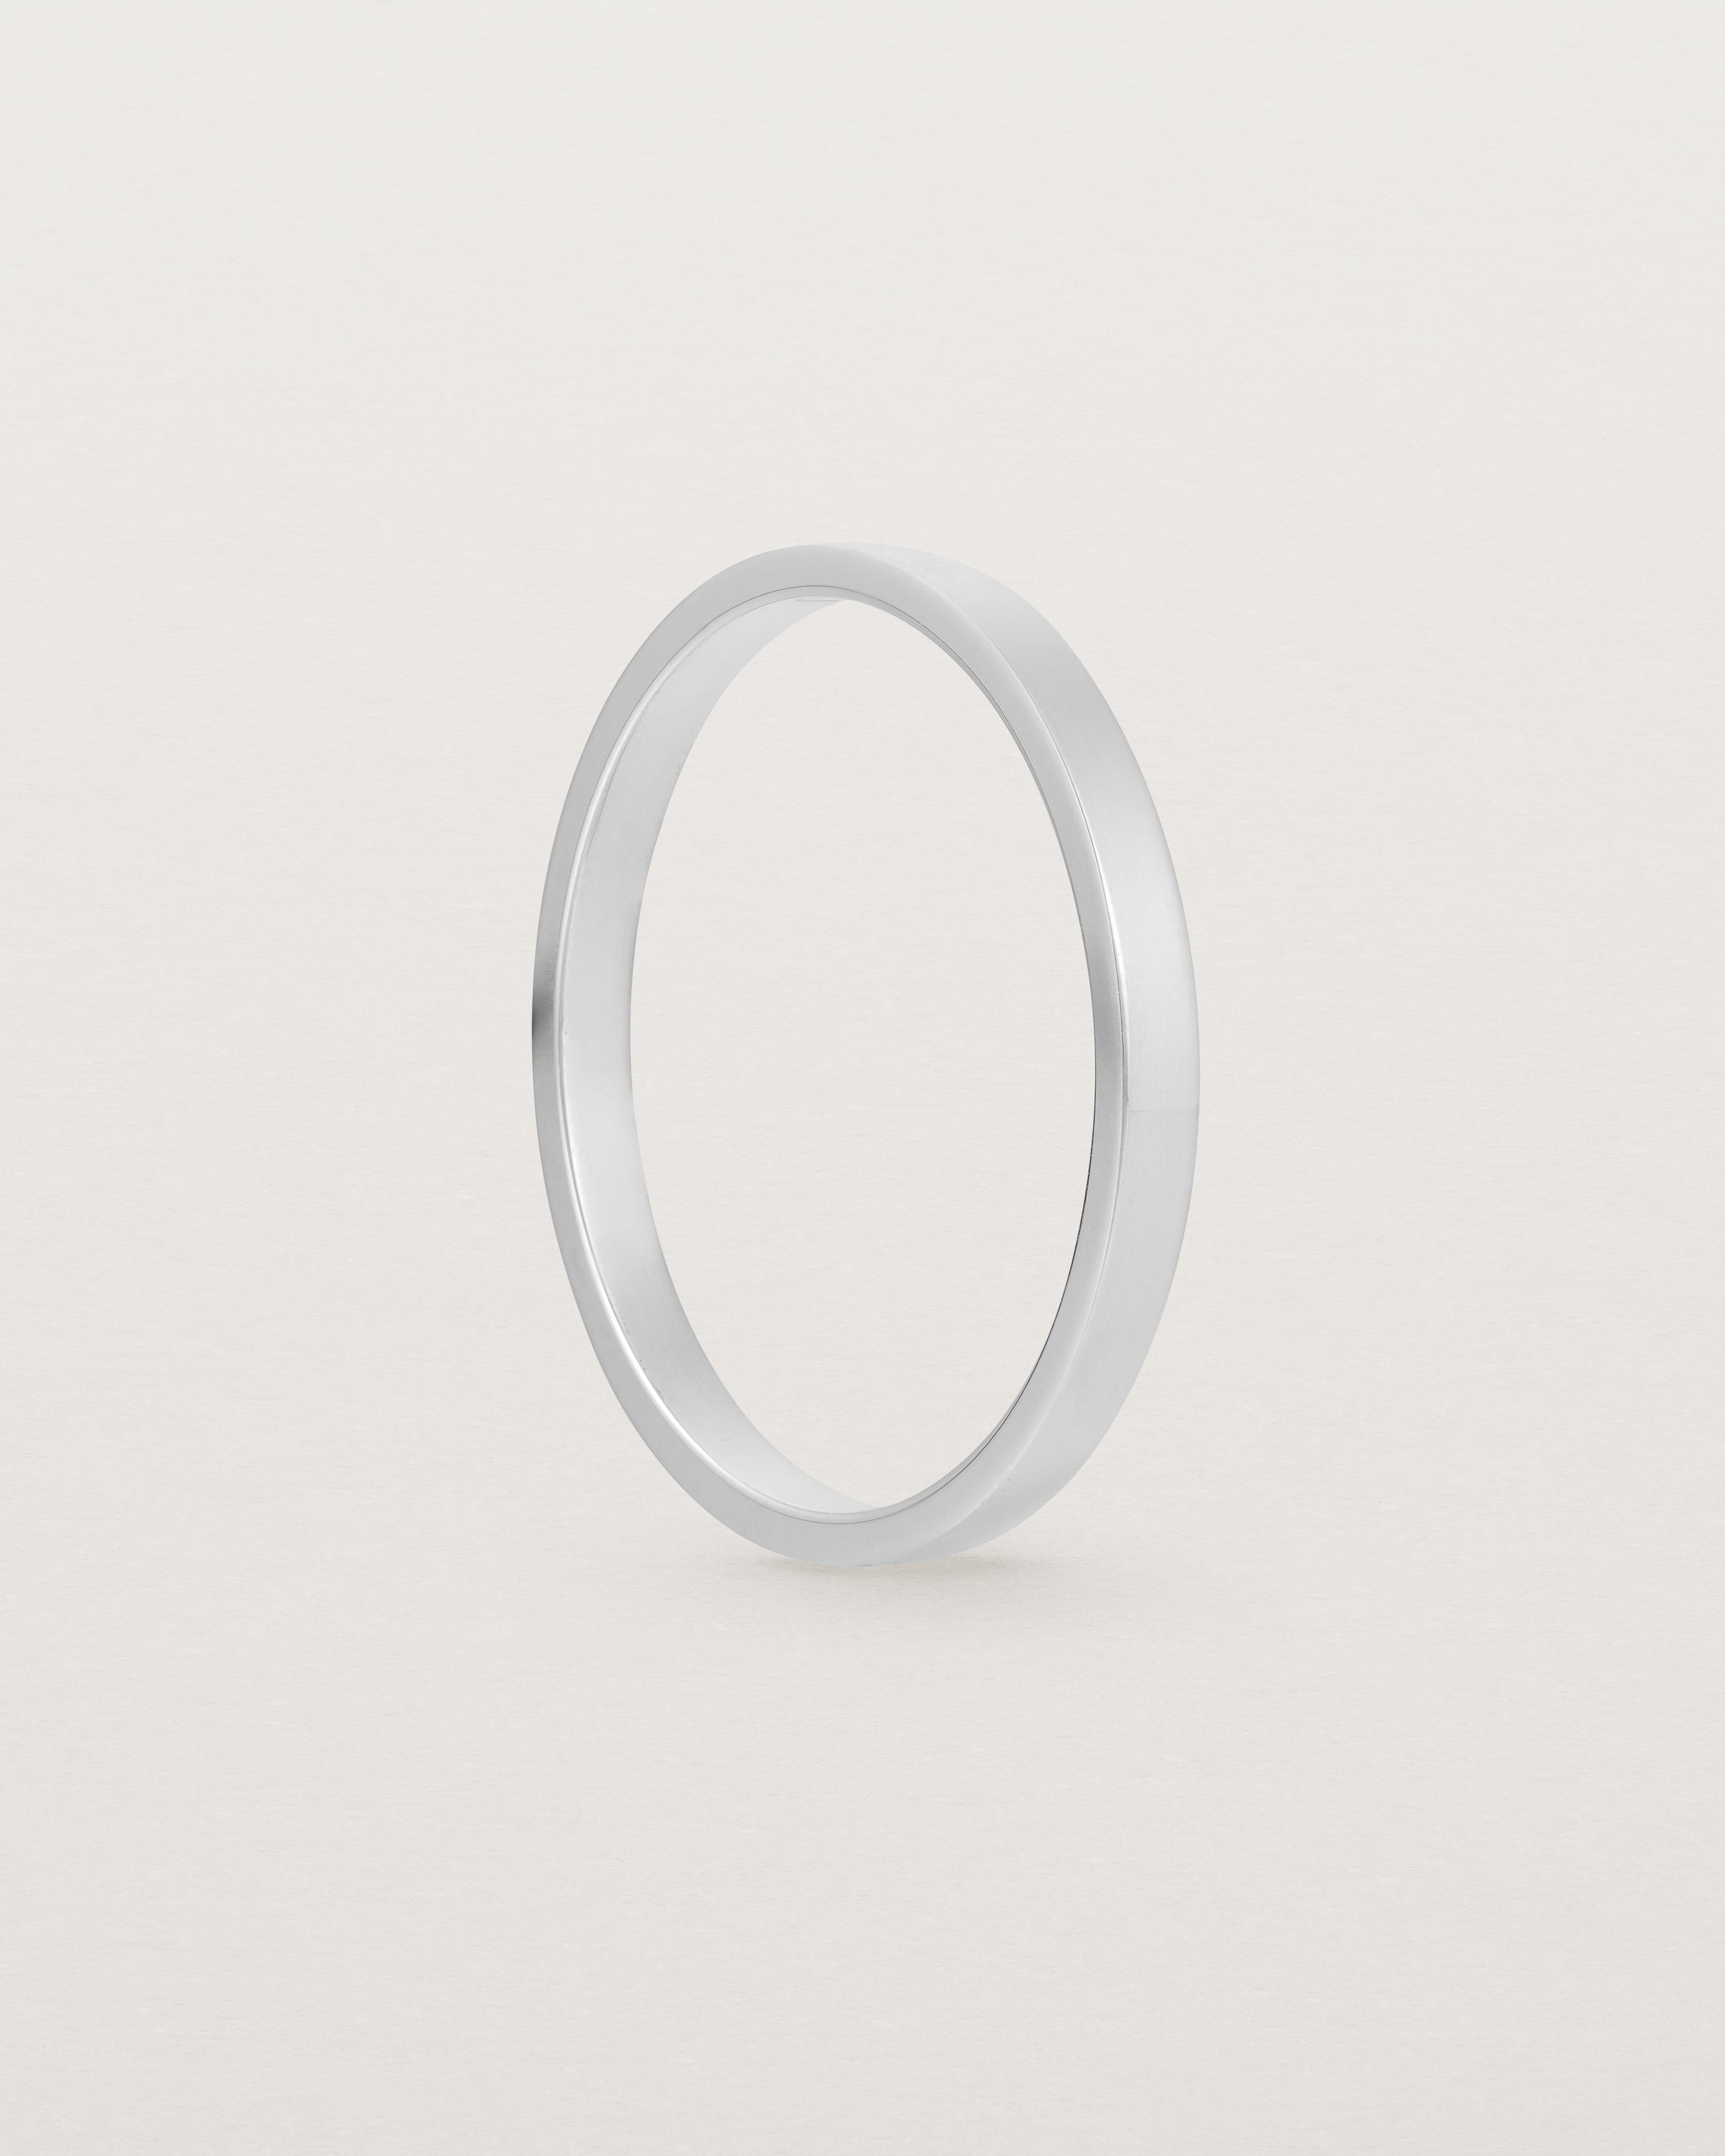 The side profile of our square profile, flat wedding band crafted in white gold